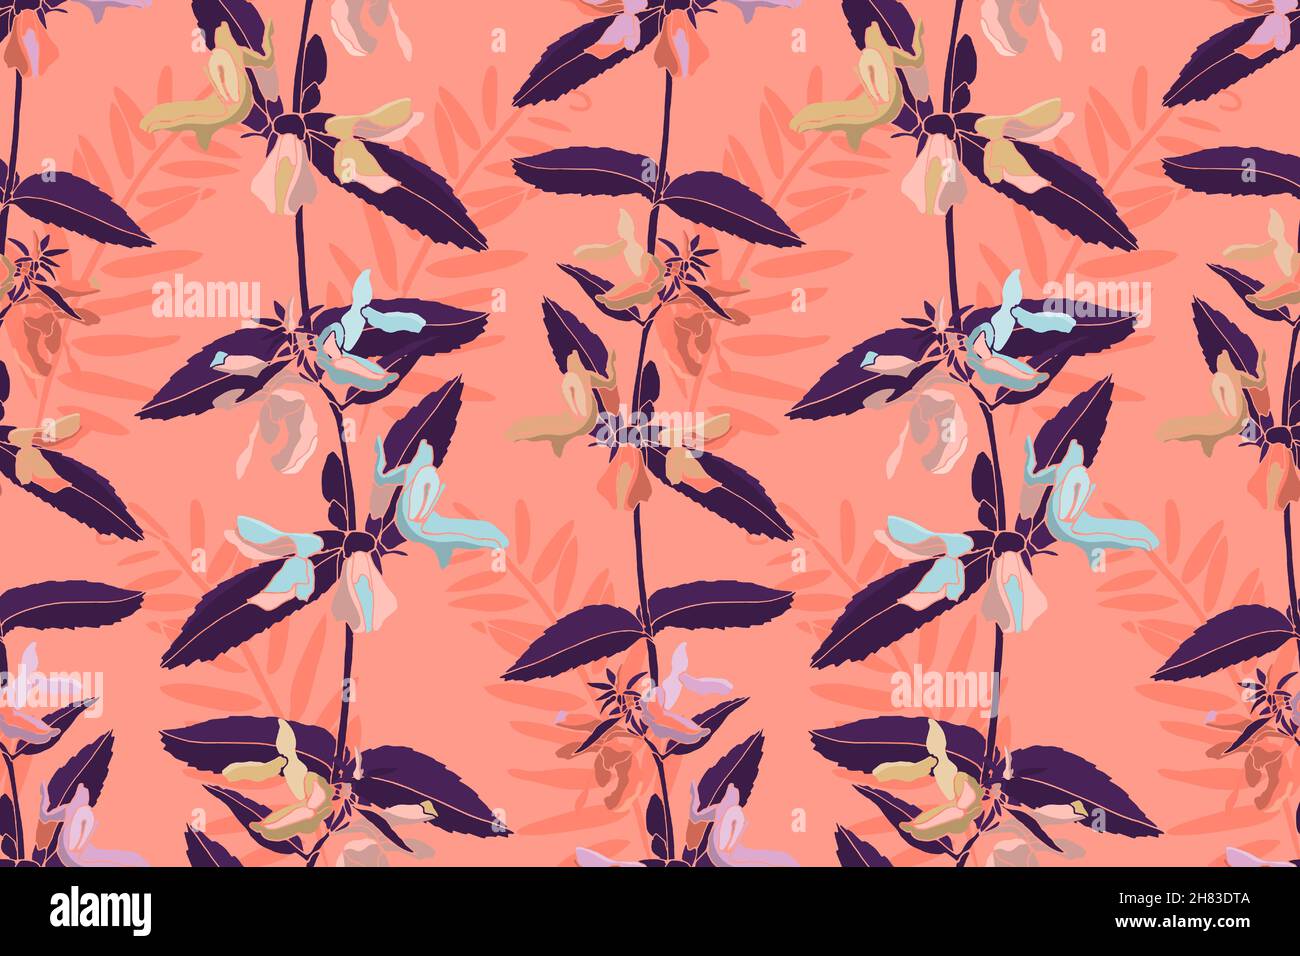 Vector floral seamless pattern. Blue, pink and coral colored flowers with purple stems and leaves isolated on a coral colored background. Stock Vector